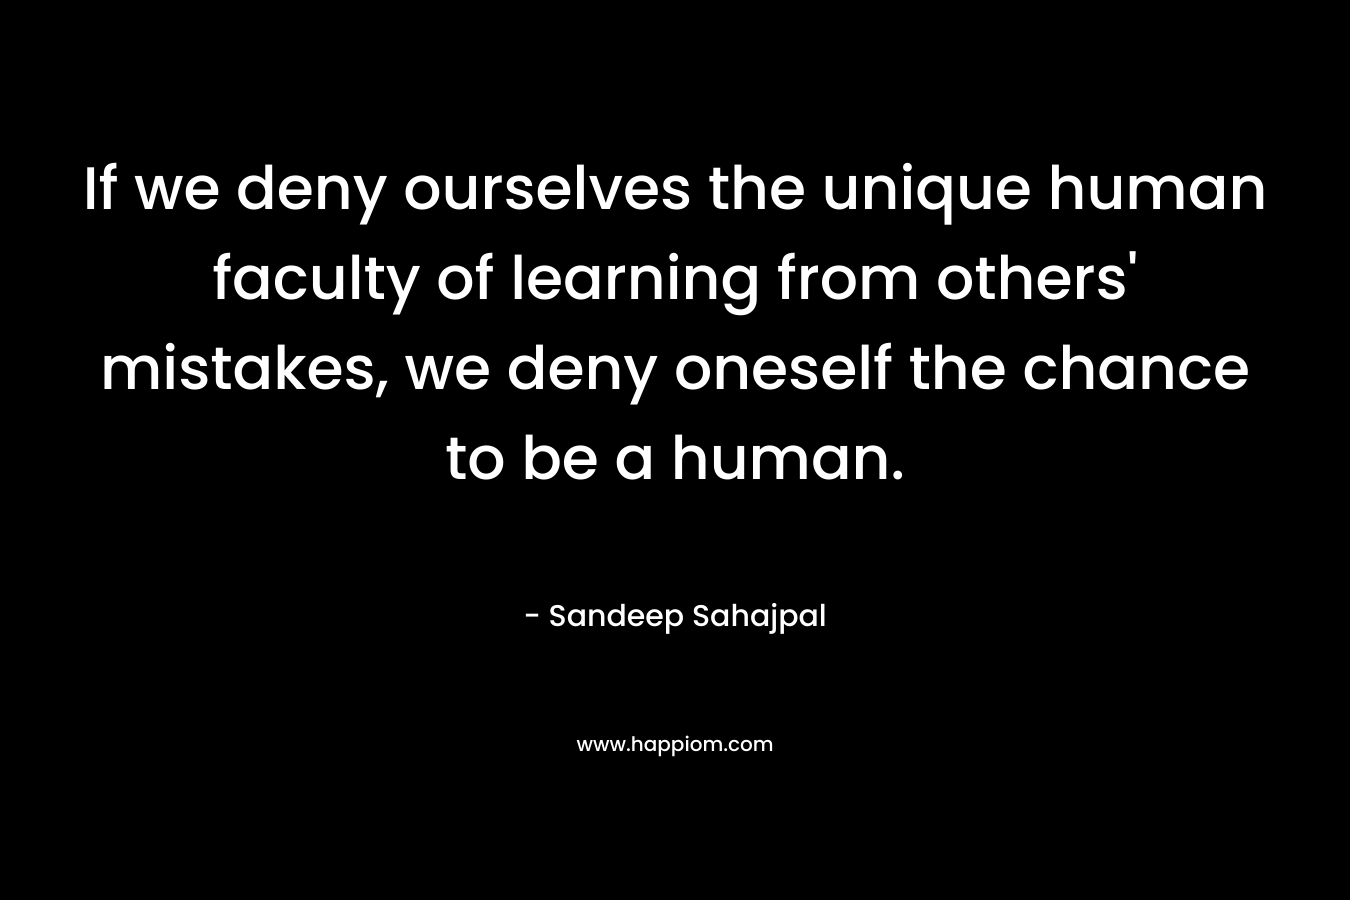 If we deny ourselves the unique human faculty of learning from others’ mistakes, we deny oneself the chance to be a human. – Sandeep Sahajpal